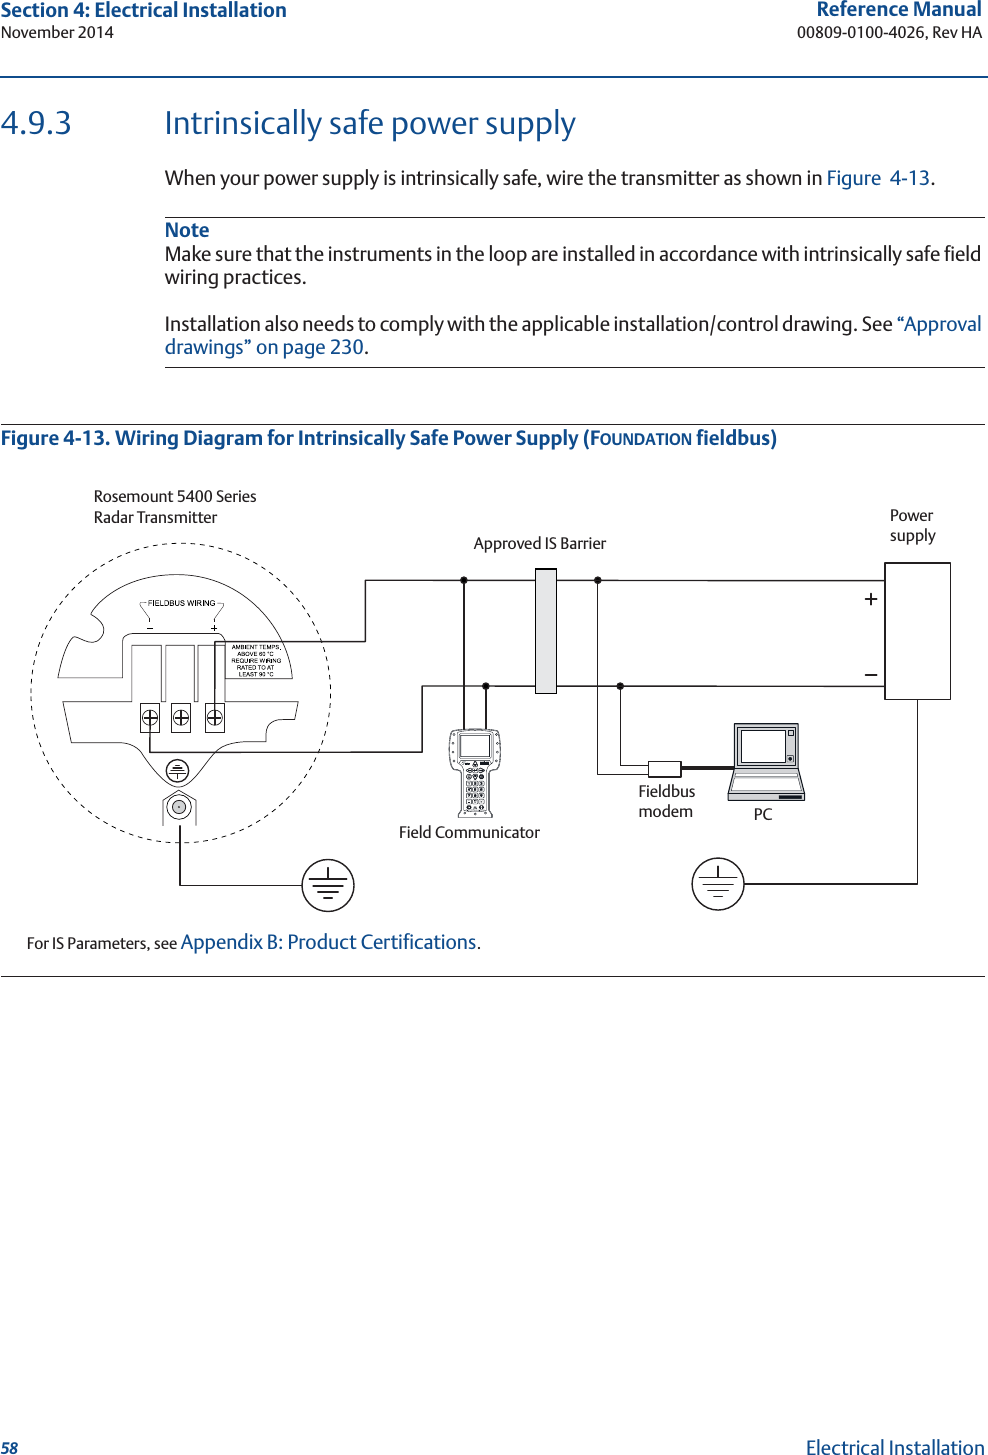 58Reference Manual00809-0100-4026, Rev HASection 4: Electrical InstallationNovember 2014Electrical Installation4.9.3 Intrinsically safe power supplyWhen your power supply is intrinsically safe, wire the transmitter as shown in Figure 4-13.NoteMake sure that the instruments in the loop are installed in accordance with intrinsically safe field wiring practices.Installation also needs to comply with the applicable installation/control drawing. See “Approval drawings” on page 230.Figure 4-13. Wiring Diagram for Intrinsically Safe Power Supply (FOUNDATION fieldbus) Rosemount 5400 Series Radar TransmitterFor IS Parameters, see Appendix B: Product Certifications.Approved IS BarrierField CommunicatorFieldbus modemPCPower supply